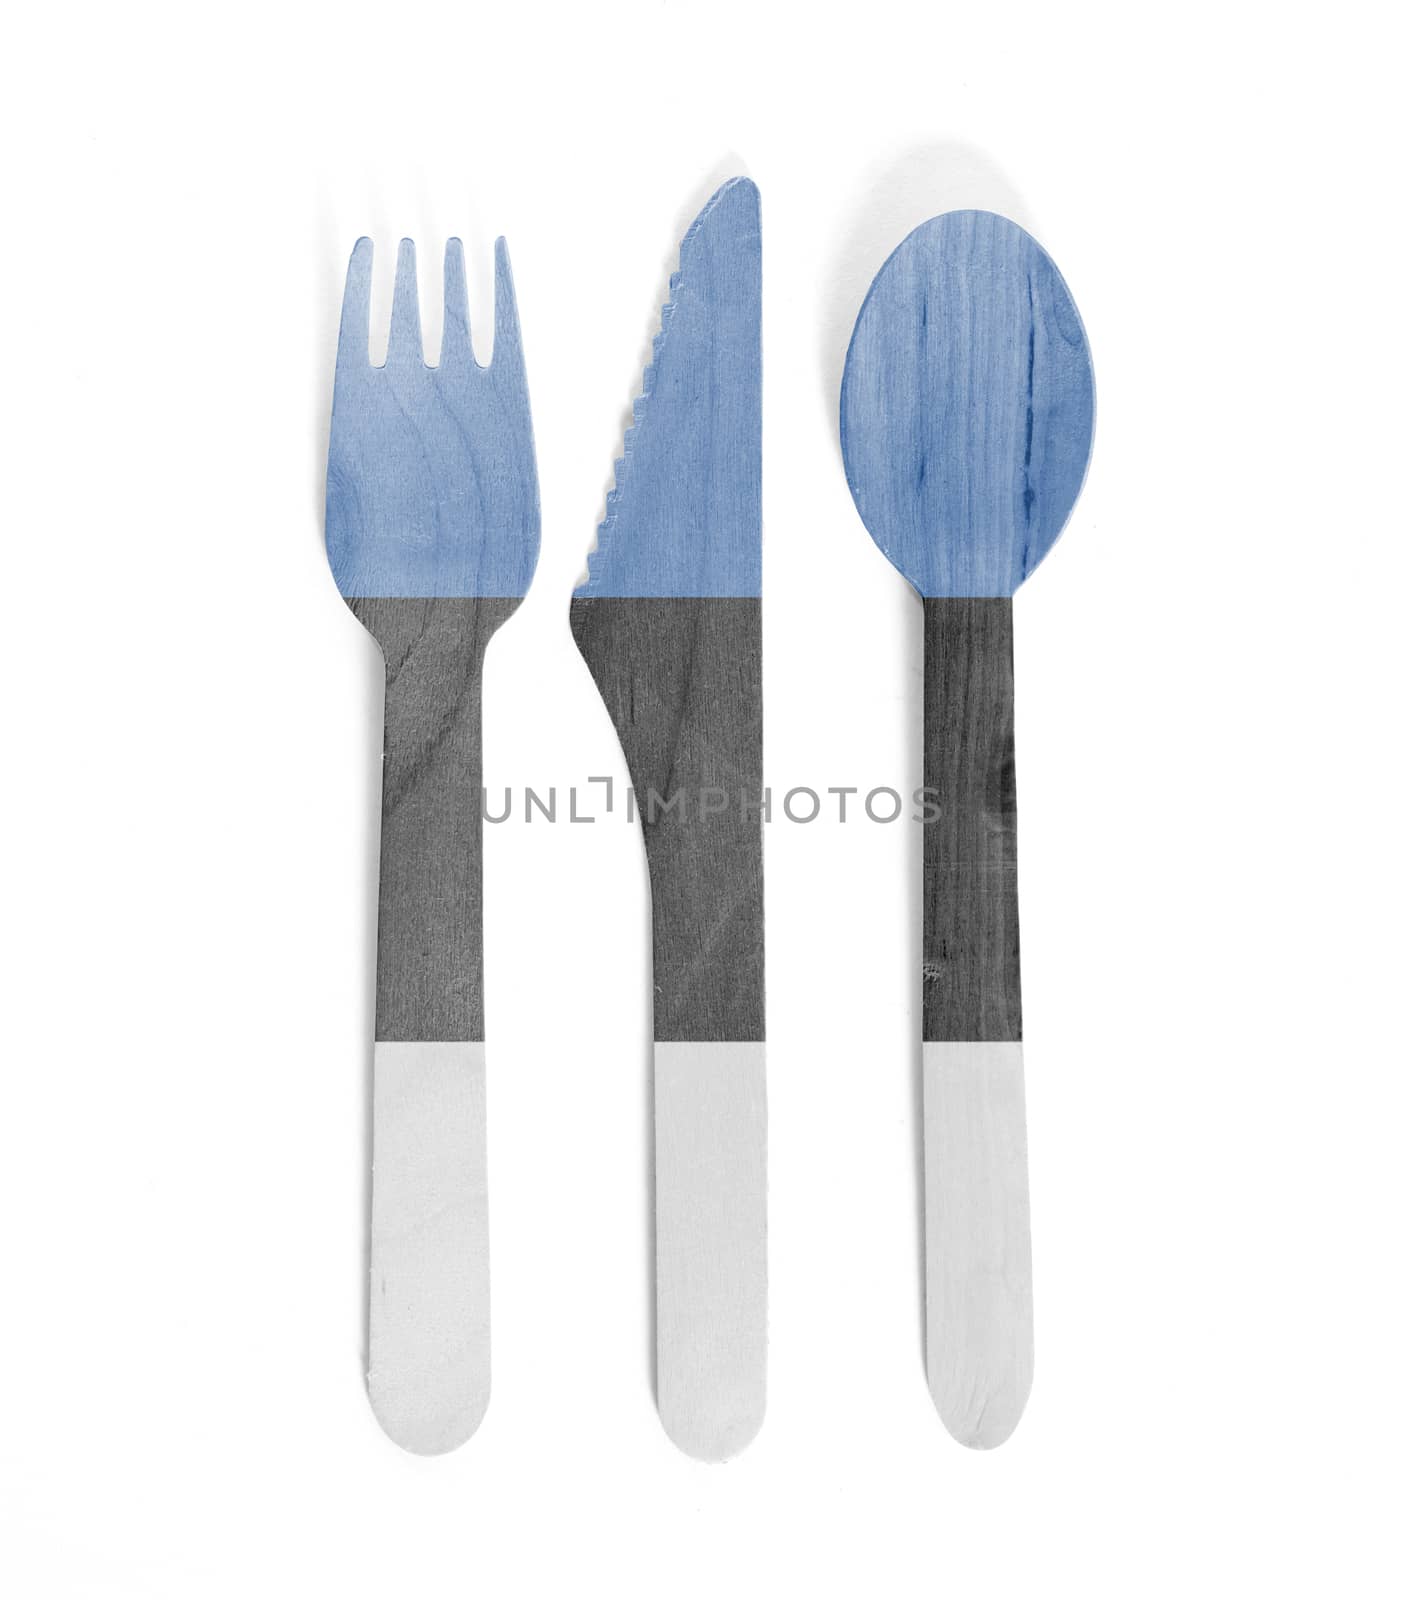 Eco friendly wooden cutlery - Plastic free concept - Isolated - Flag of Estonia